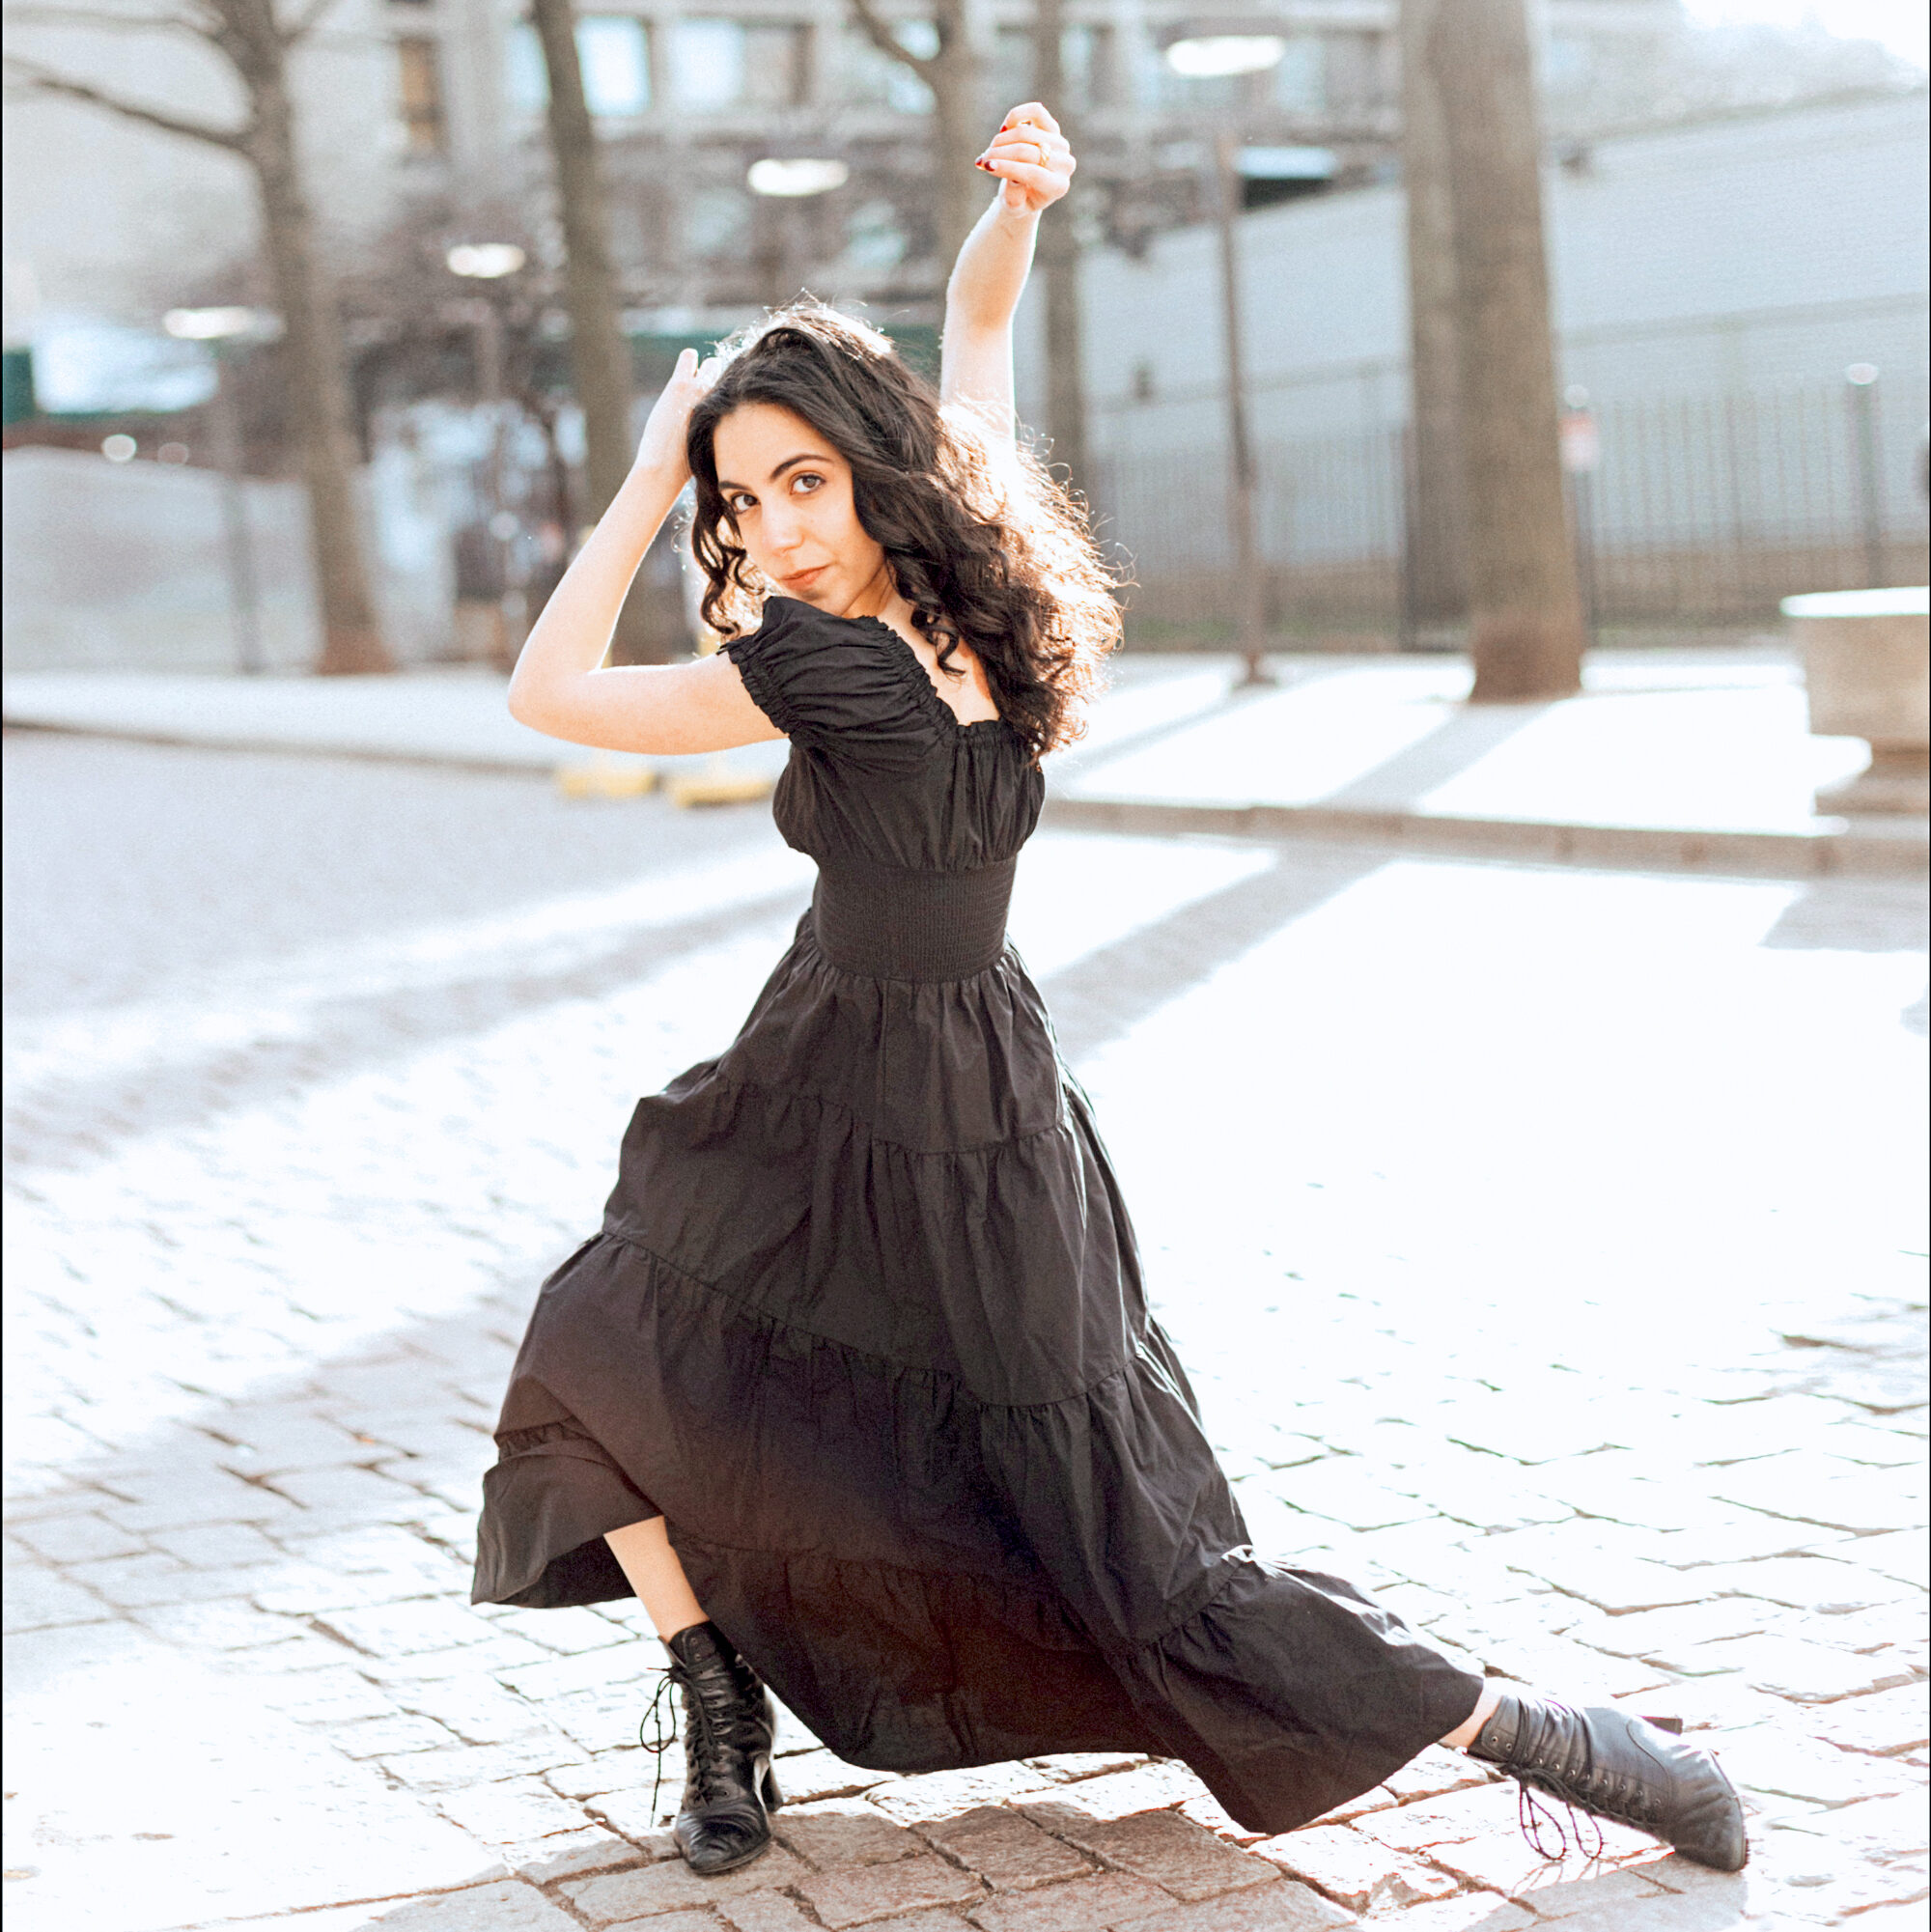 a female dancer with dark curly hair wearing a black dress and dancing in the street 